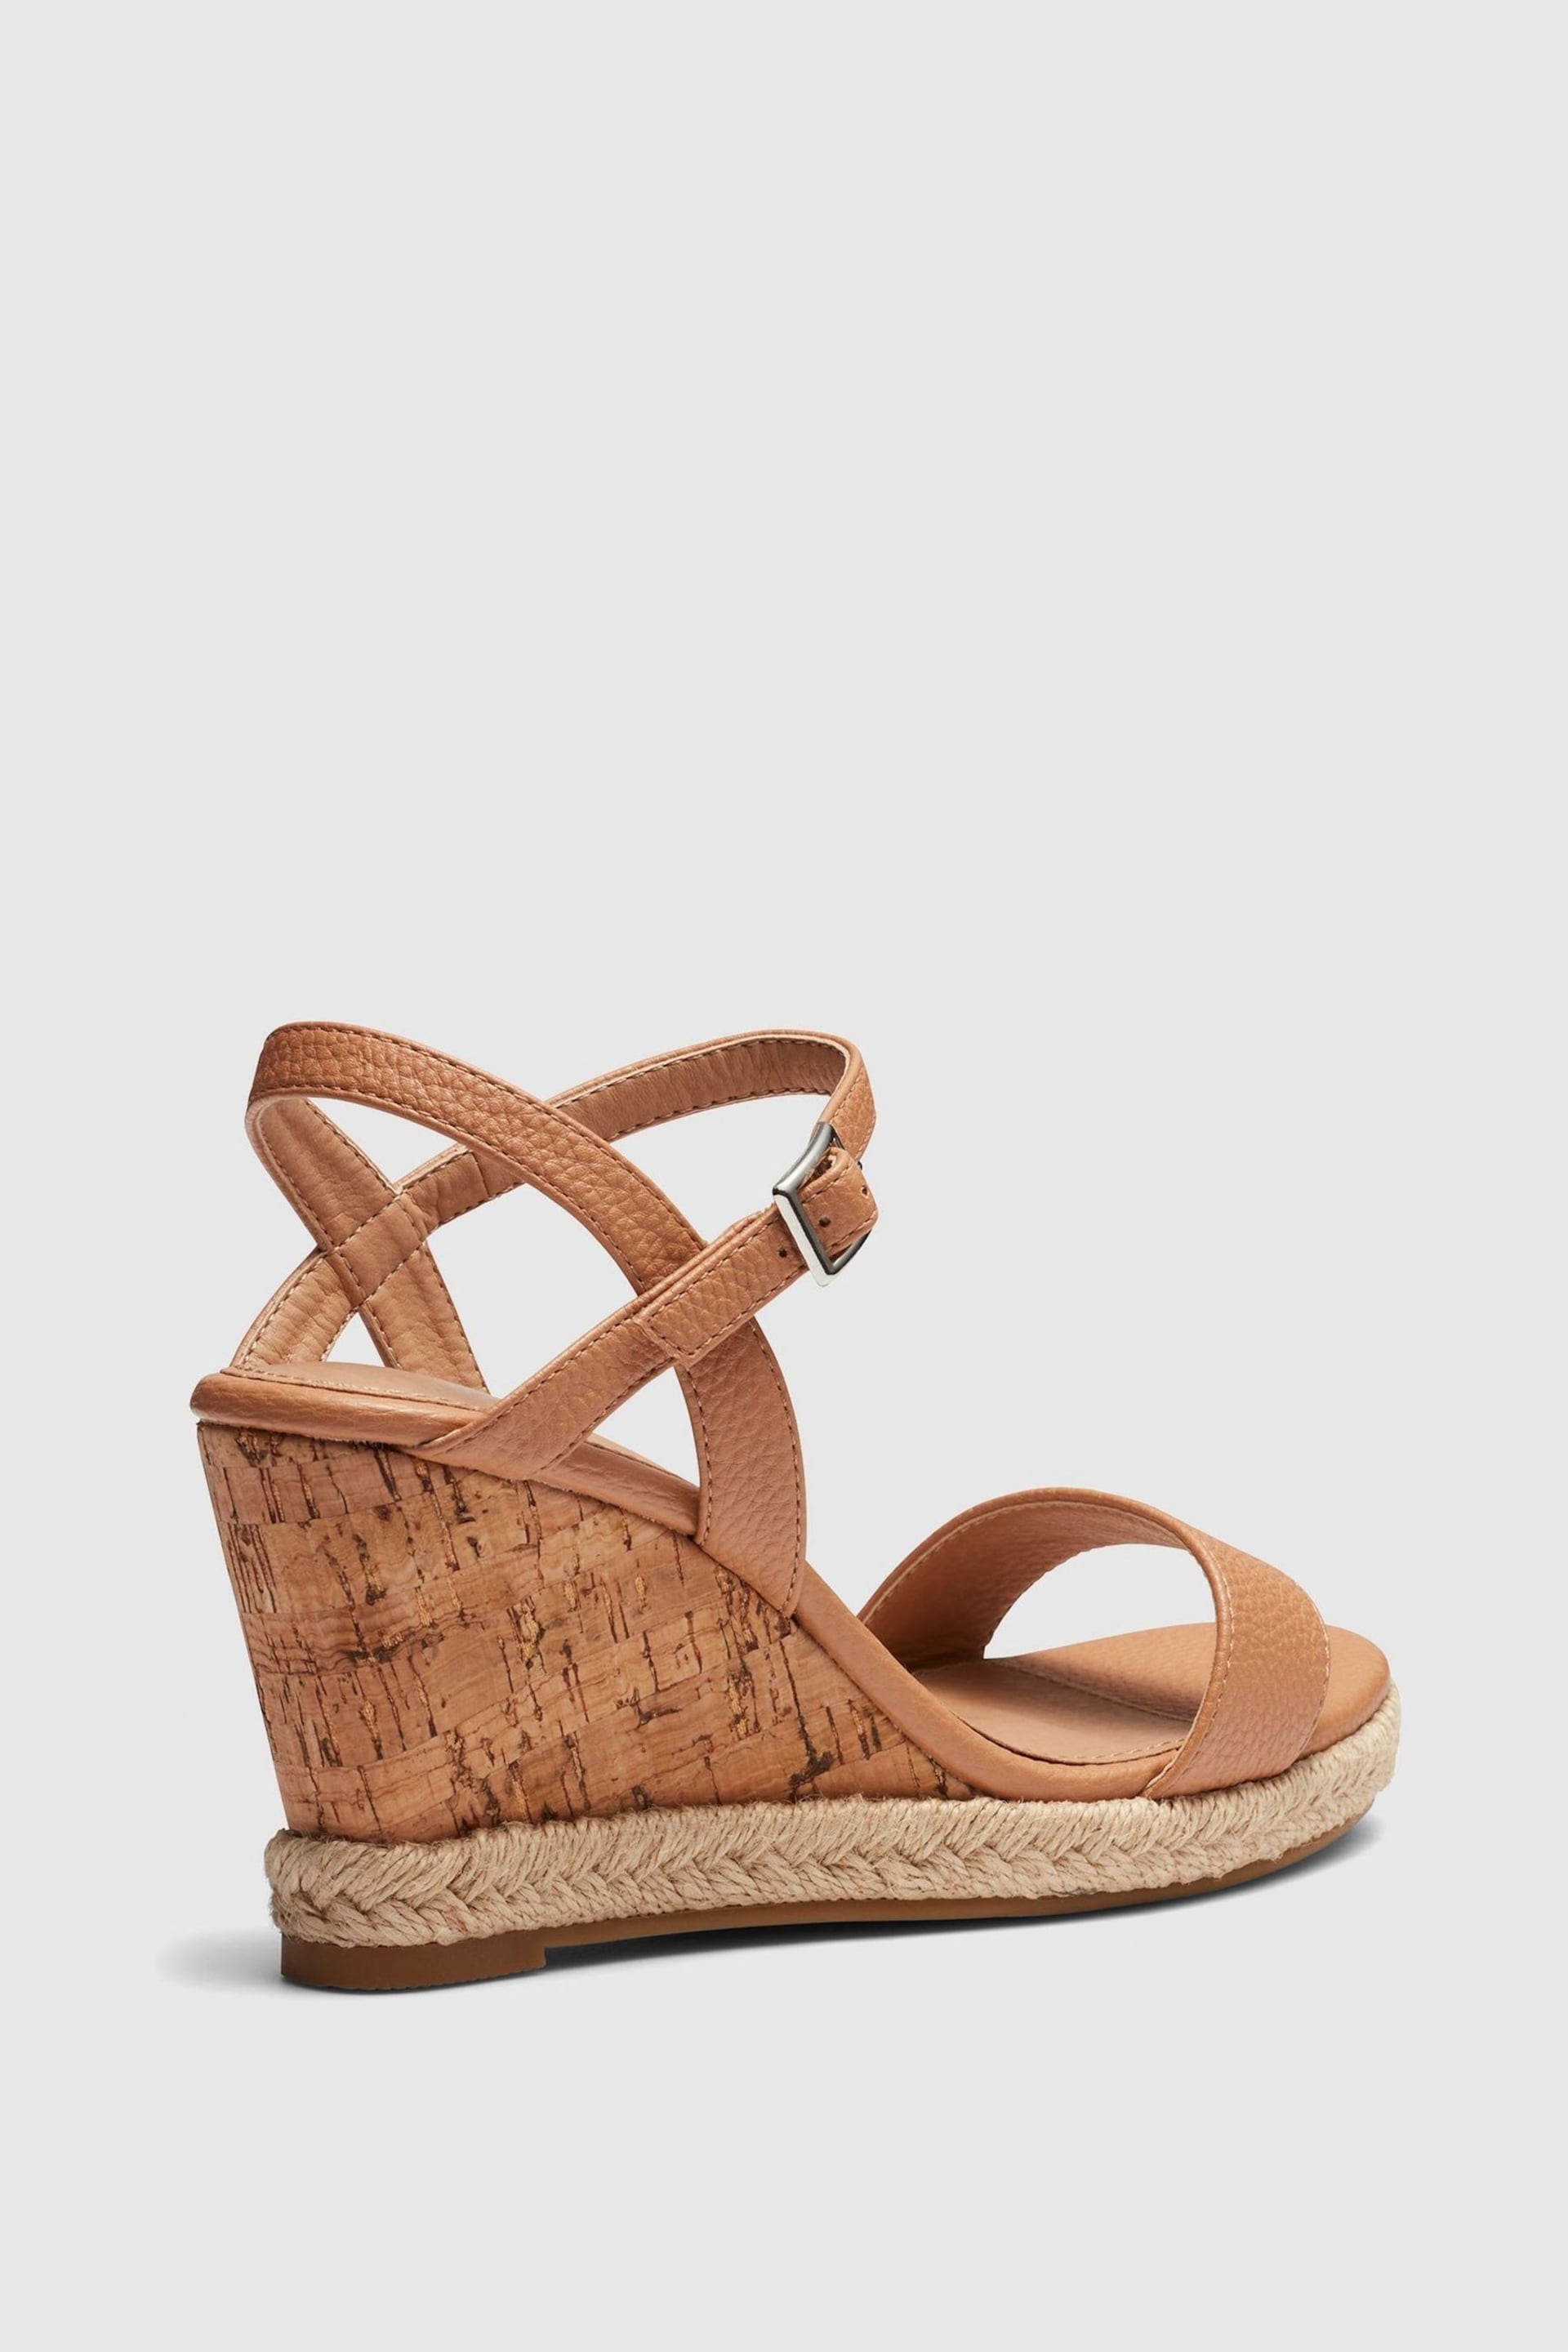 Novo Brown Wide Fit Booma Cork Wedge Sandals - Image 4 of 4